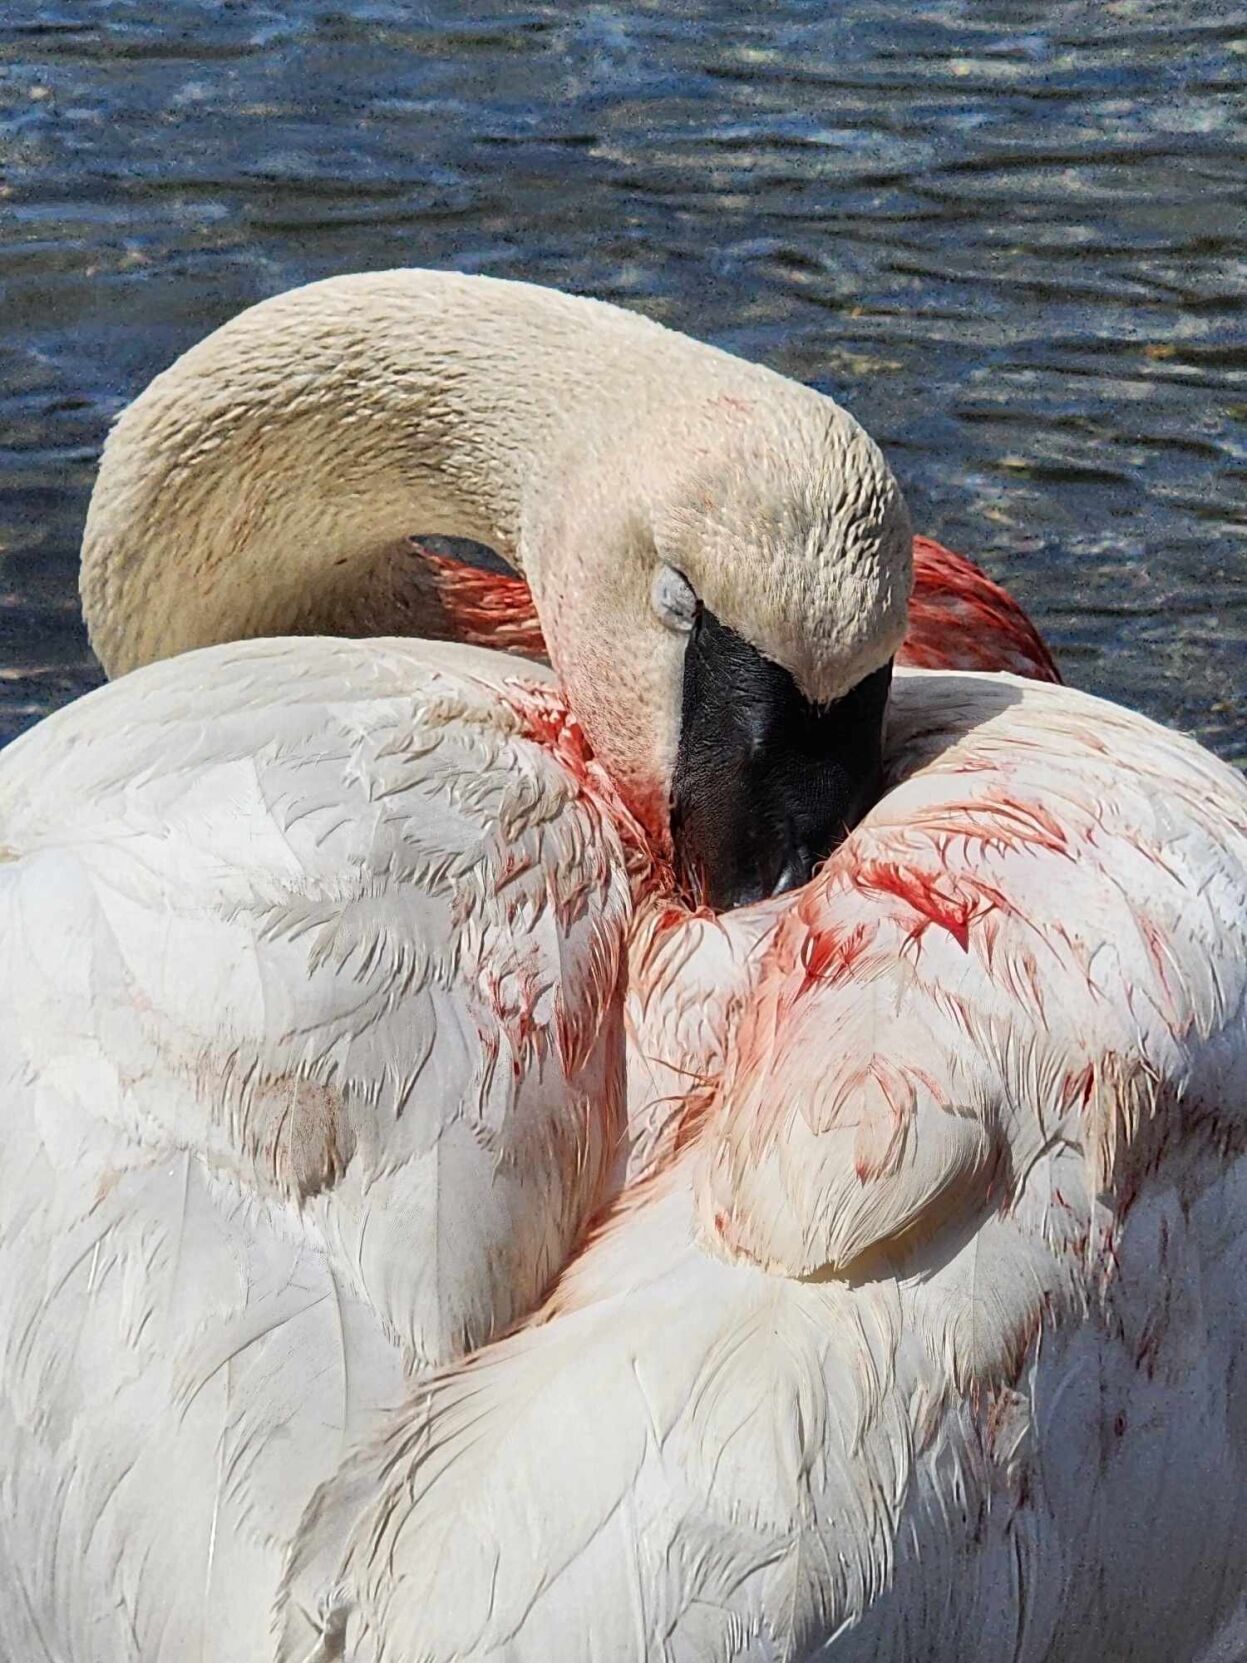 Watch: Mating swans reunited in rare dramatic video